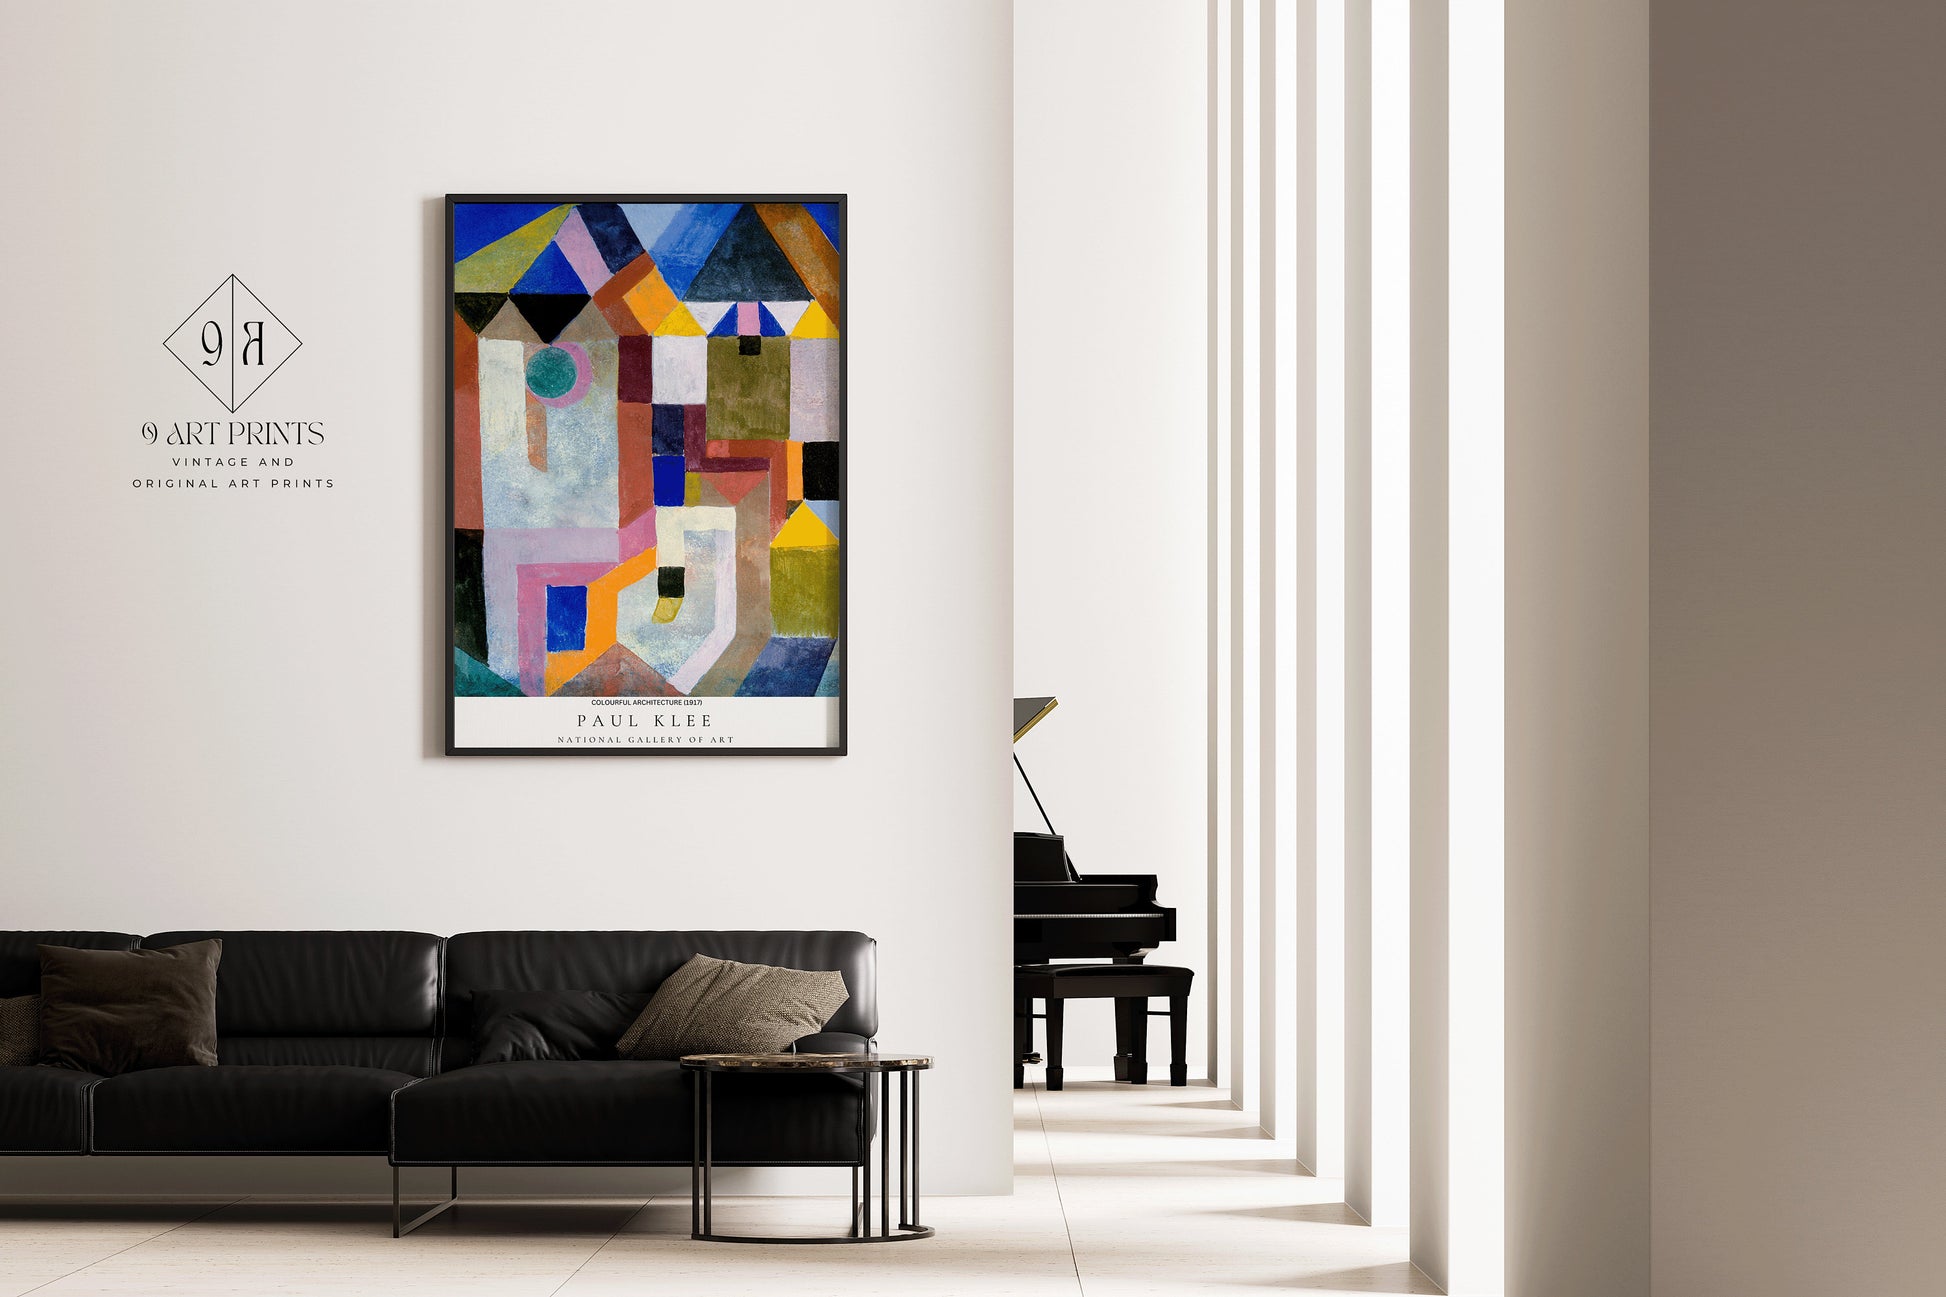 Paul Klee COLOURFUL ARCHITECTURE Poster Bauhaus Exhibition Poster Abstract Gallery Print Framed Ready to Hang Home Office Decor Museum Print